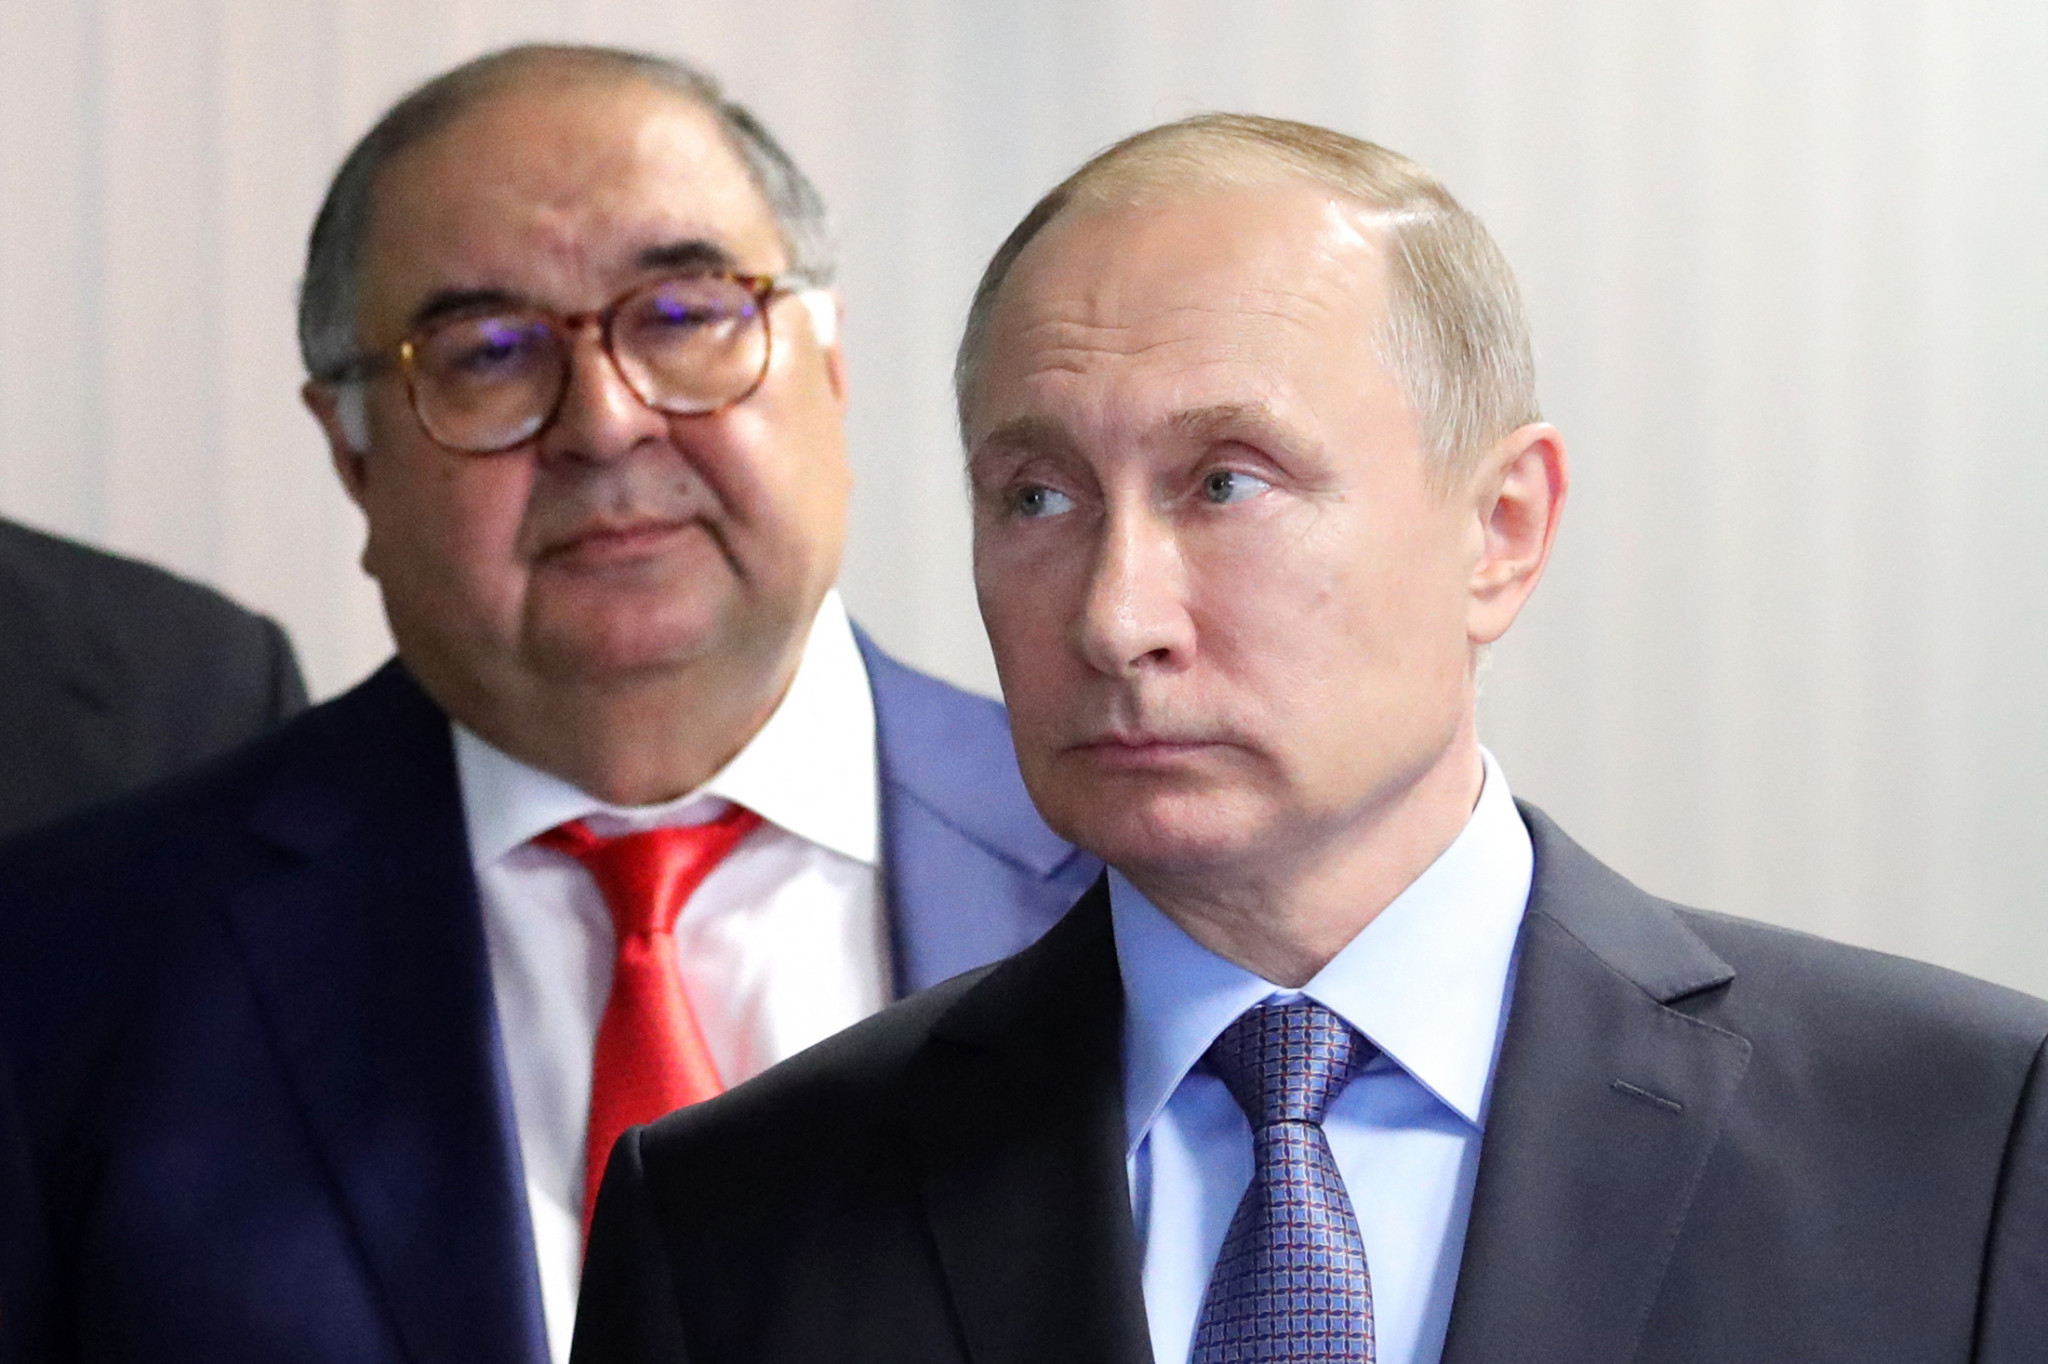 FIE President Alisher Usmanov has been placed on an EU sanctions list after being described by the organisation as 